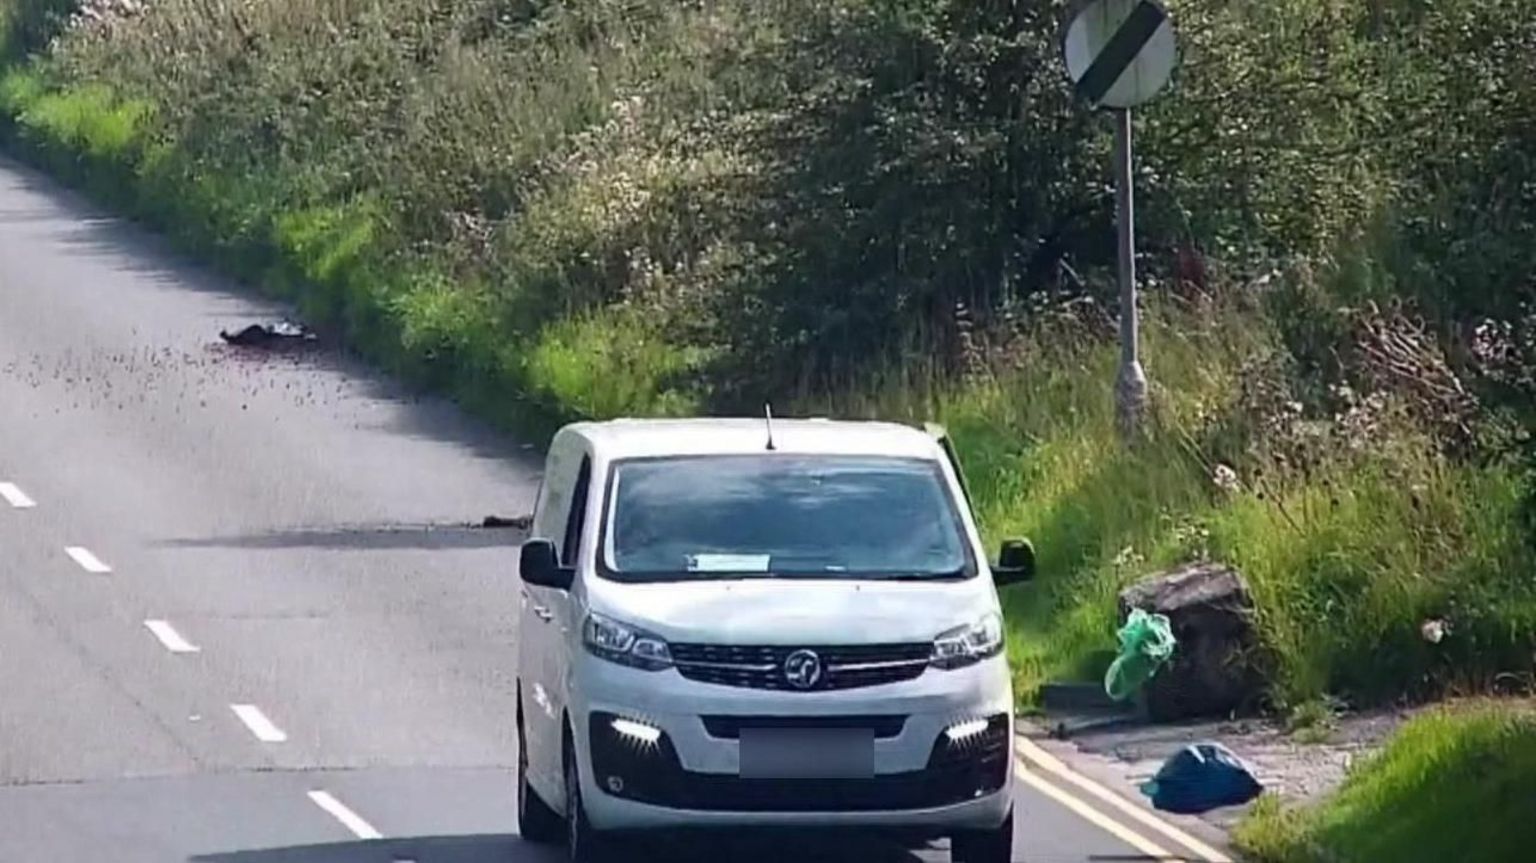 Rubbish being thrown from moving van